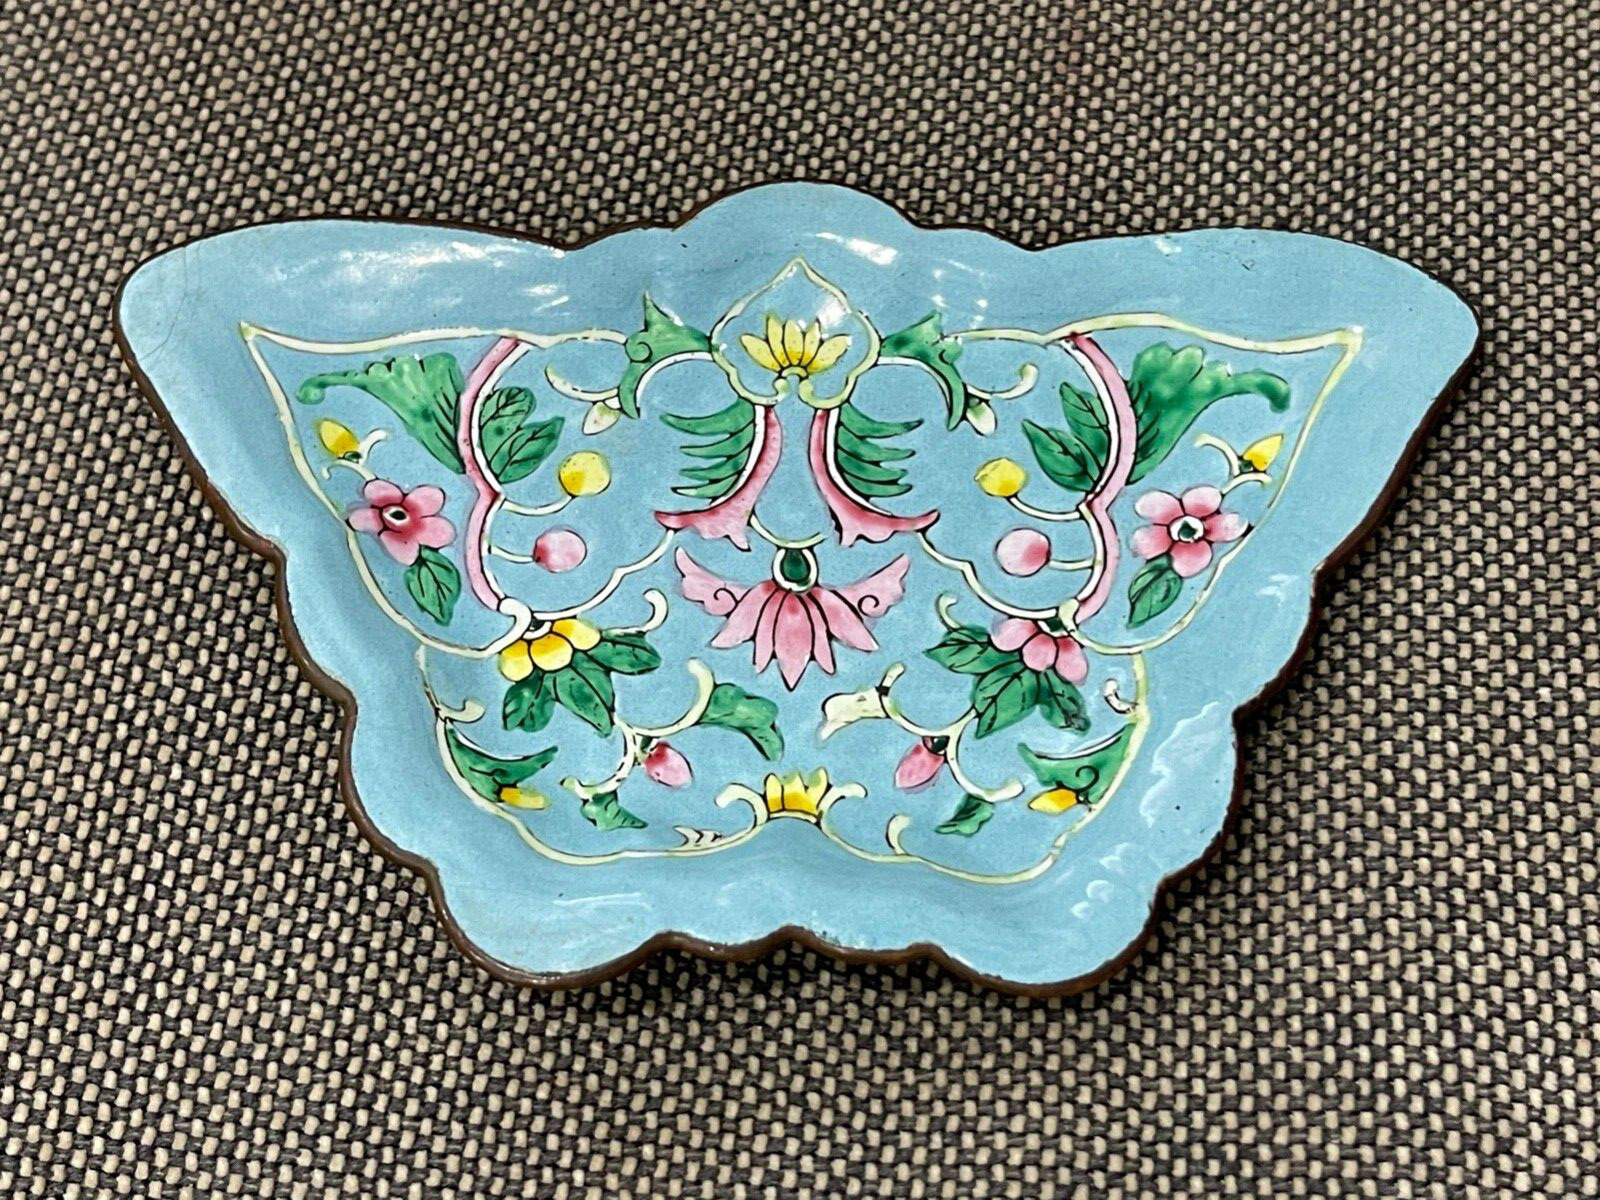 Vtg Possibly Antique Chinese Cloisonne Butterfly Form Trinket Dish w/ Floral Dec